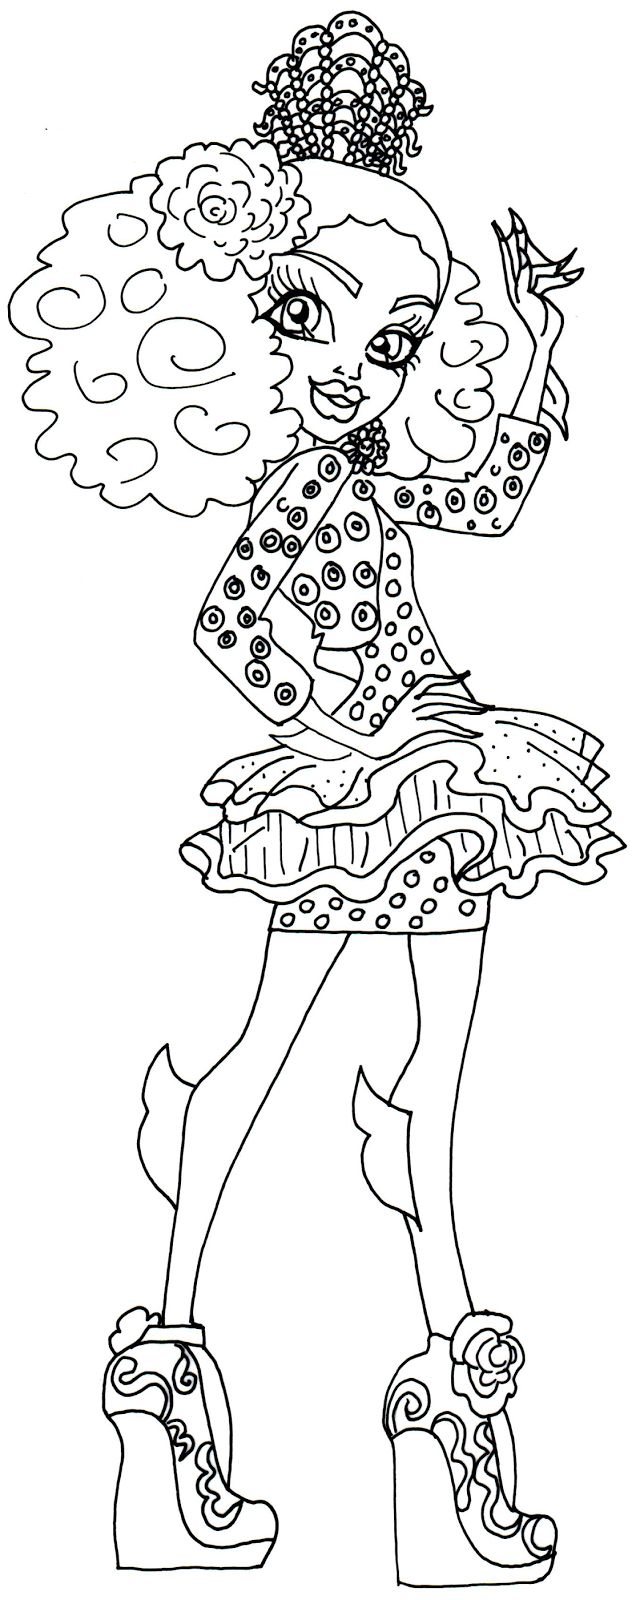 Pin by amy mills on gotta try coloring pages monster high monster high characters